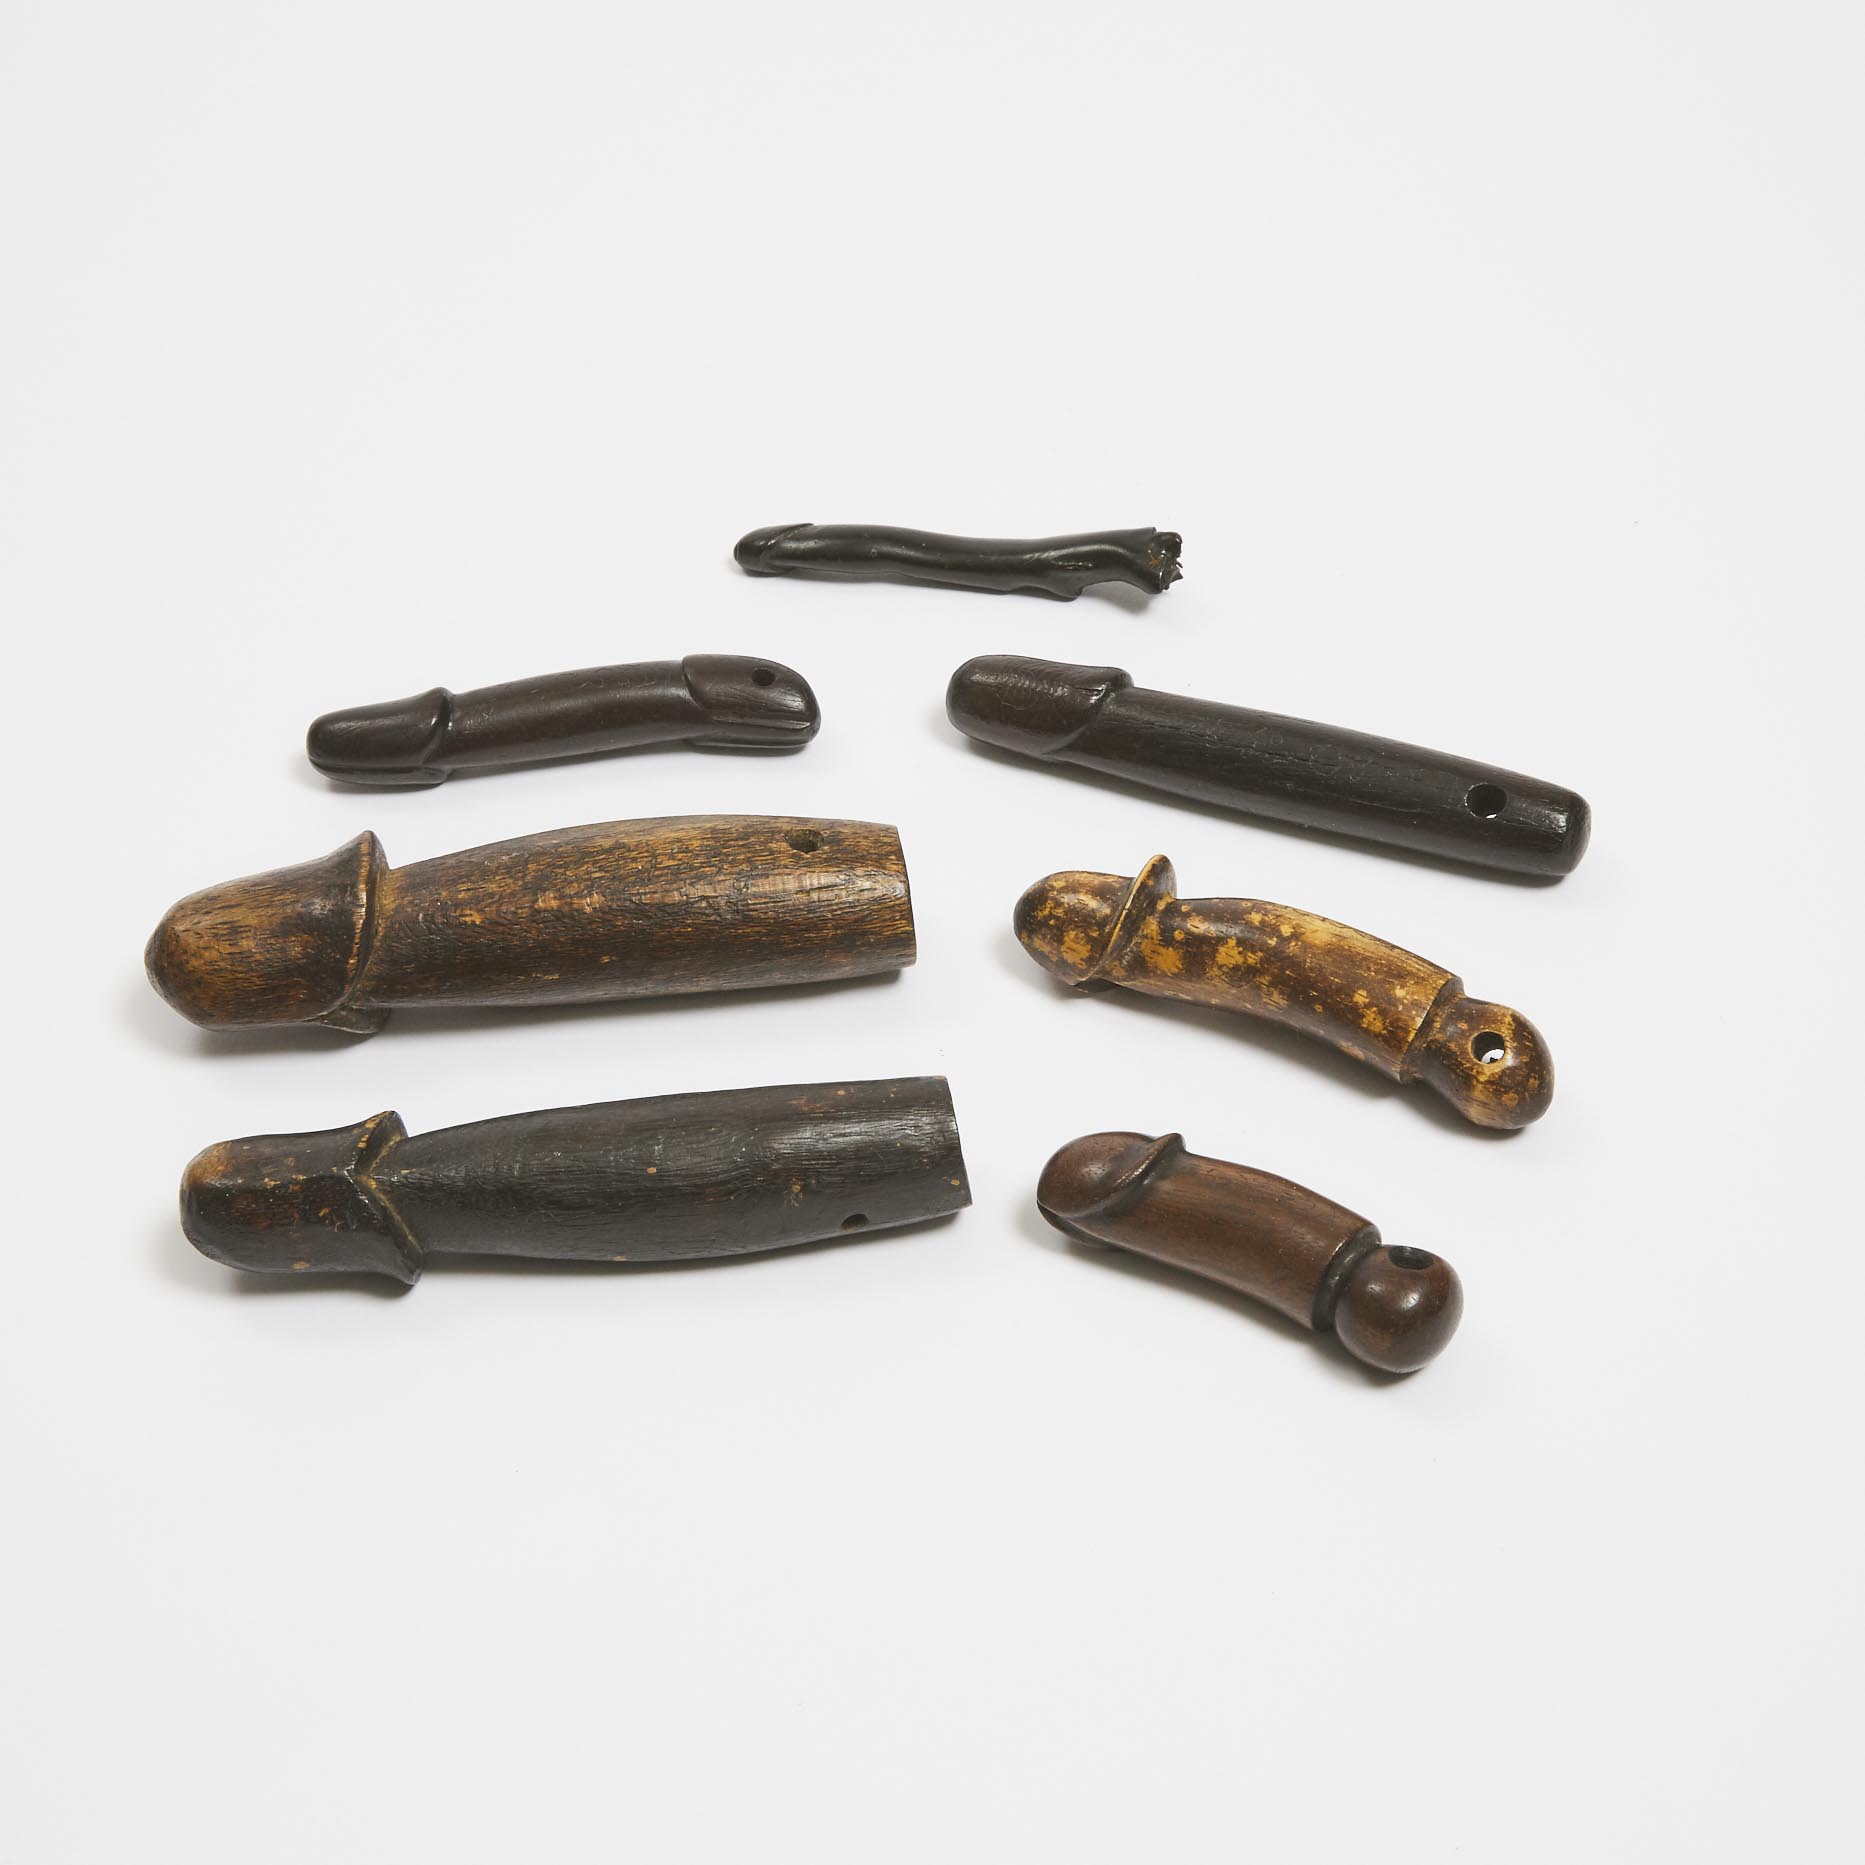 A Group of Seven Wooden Phalluses